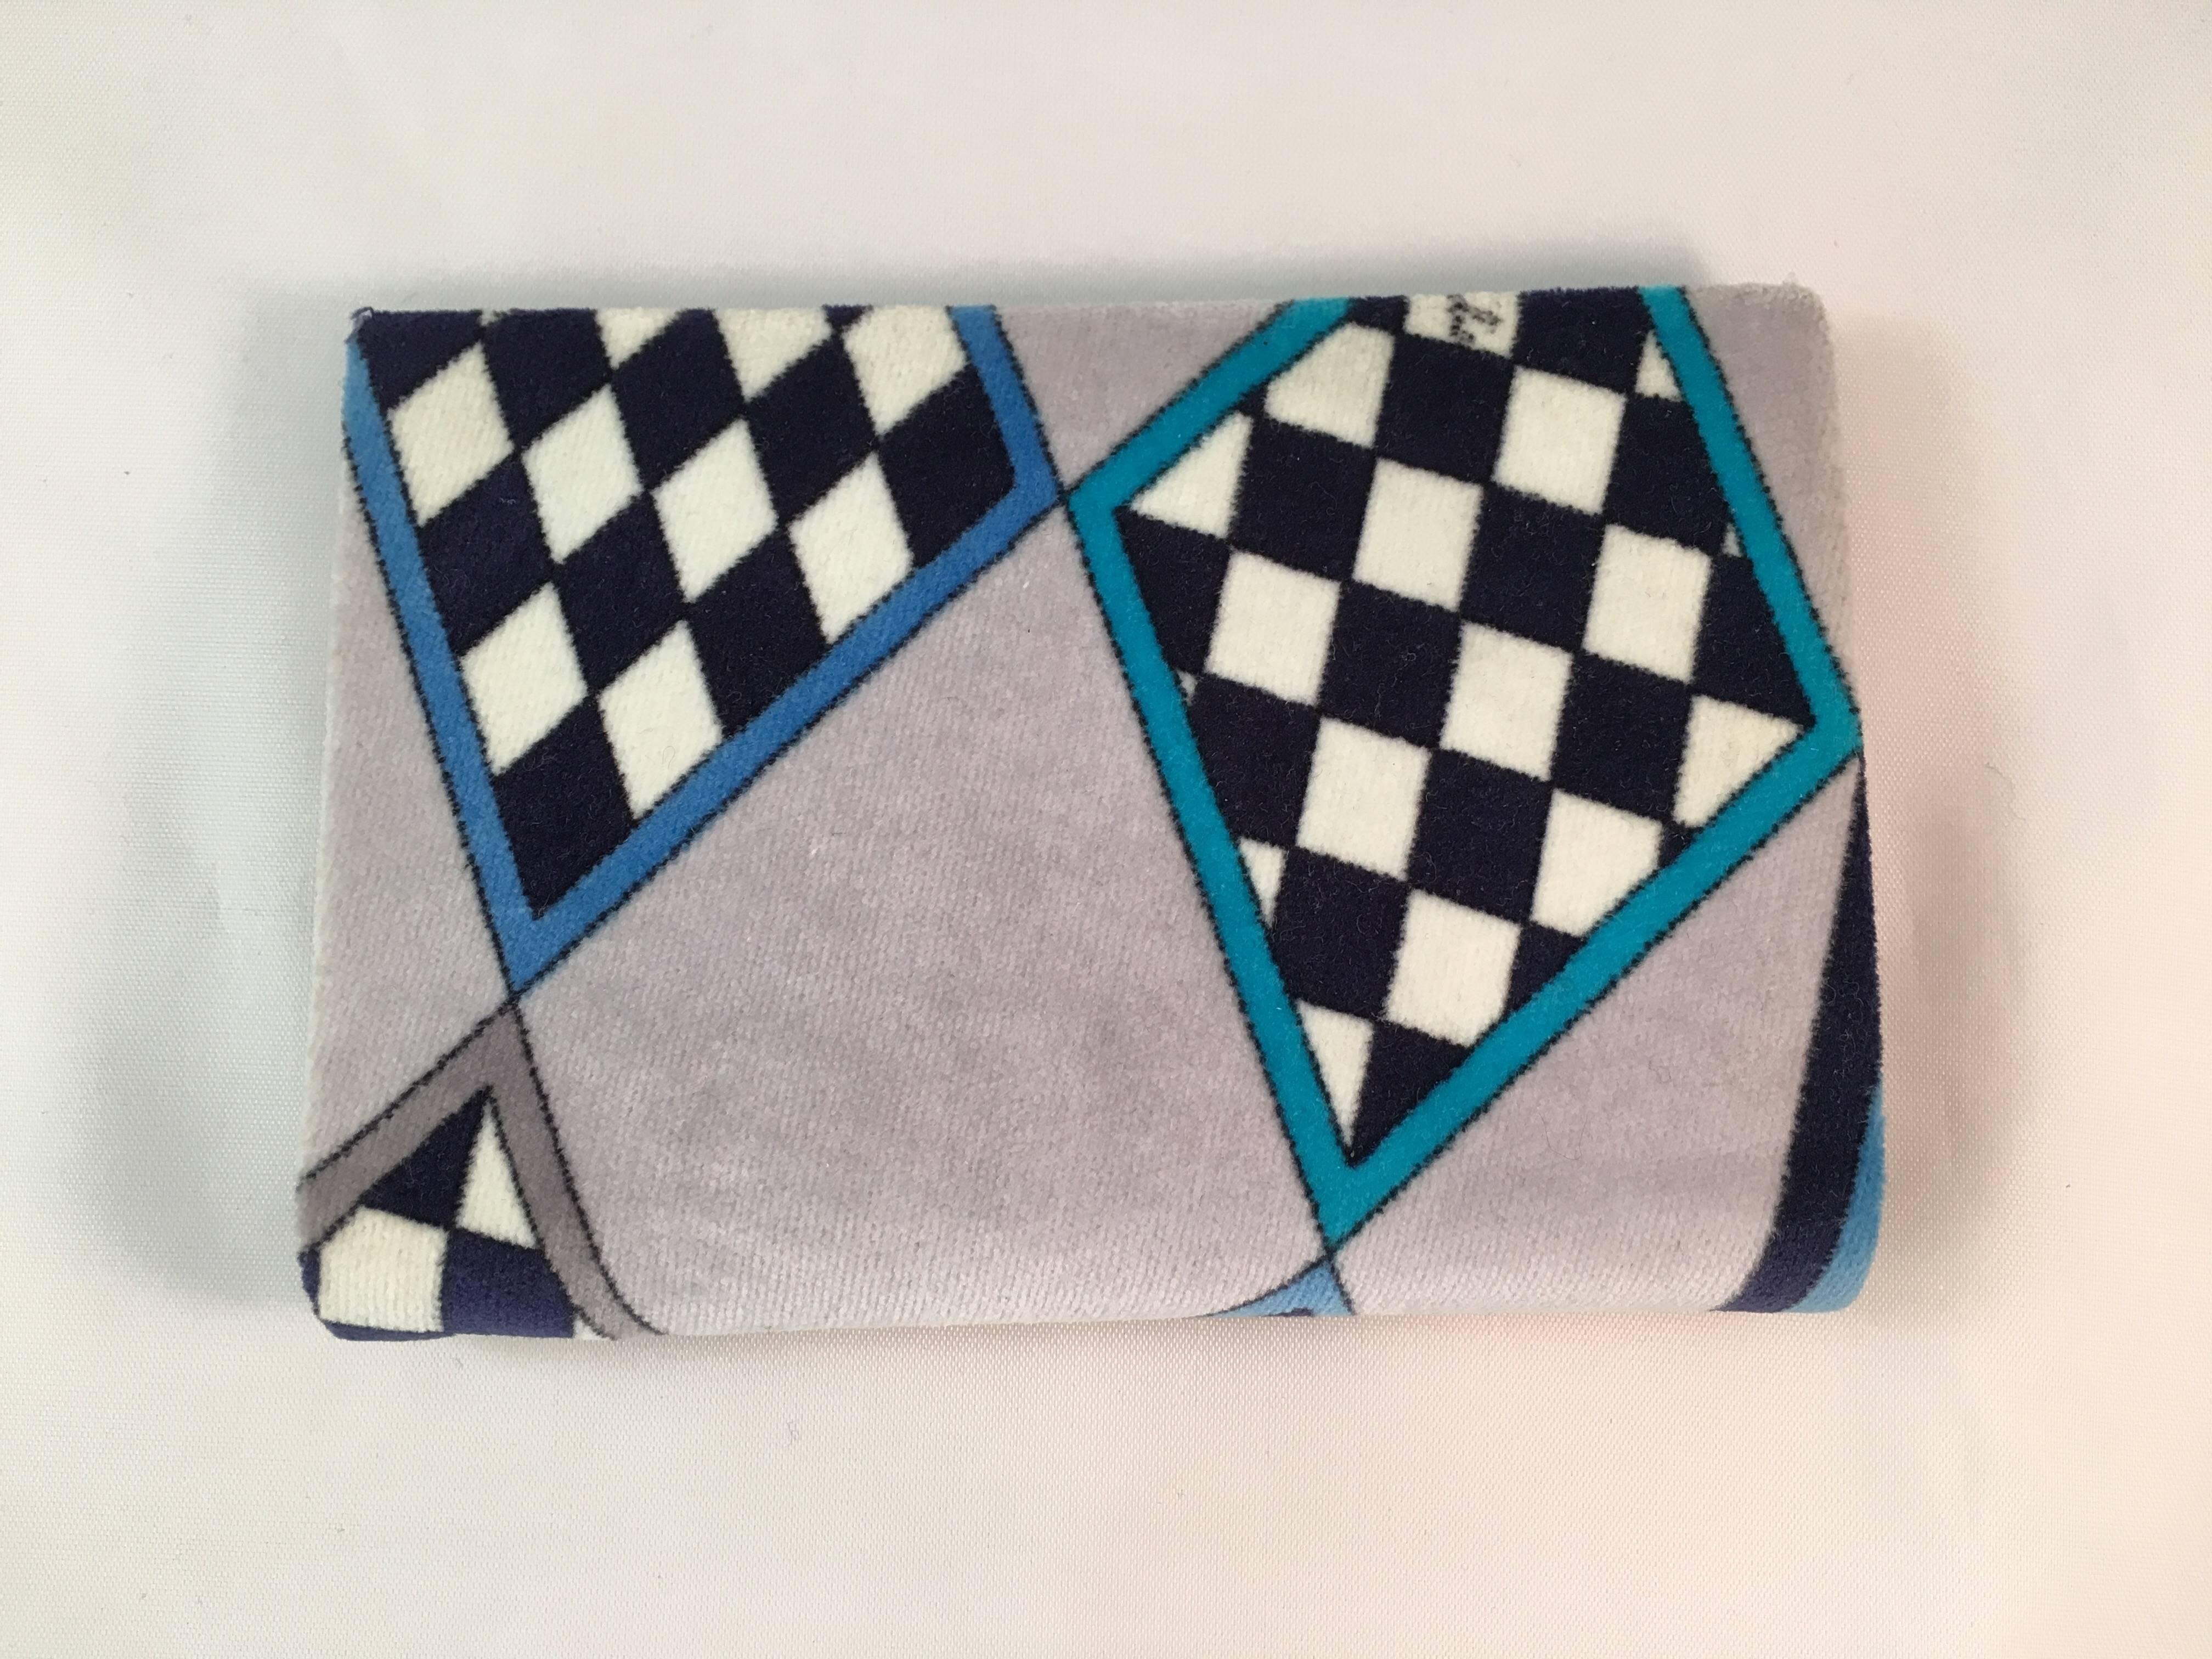 This is a 1960s printed velvet and leather Emilio Pucci wallet. It is in excellent condition and looks as if it was never used. It features a geometric print in black and white and shades of grey and blue. the interior is a teal colored leather. It